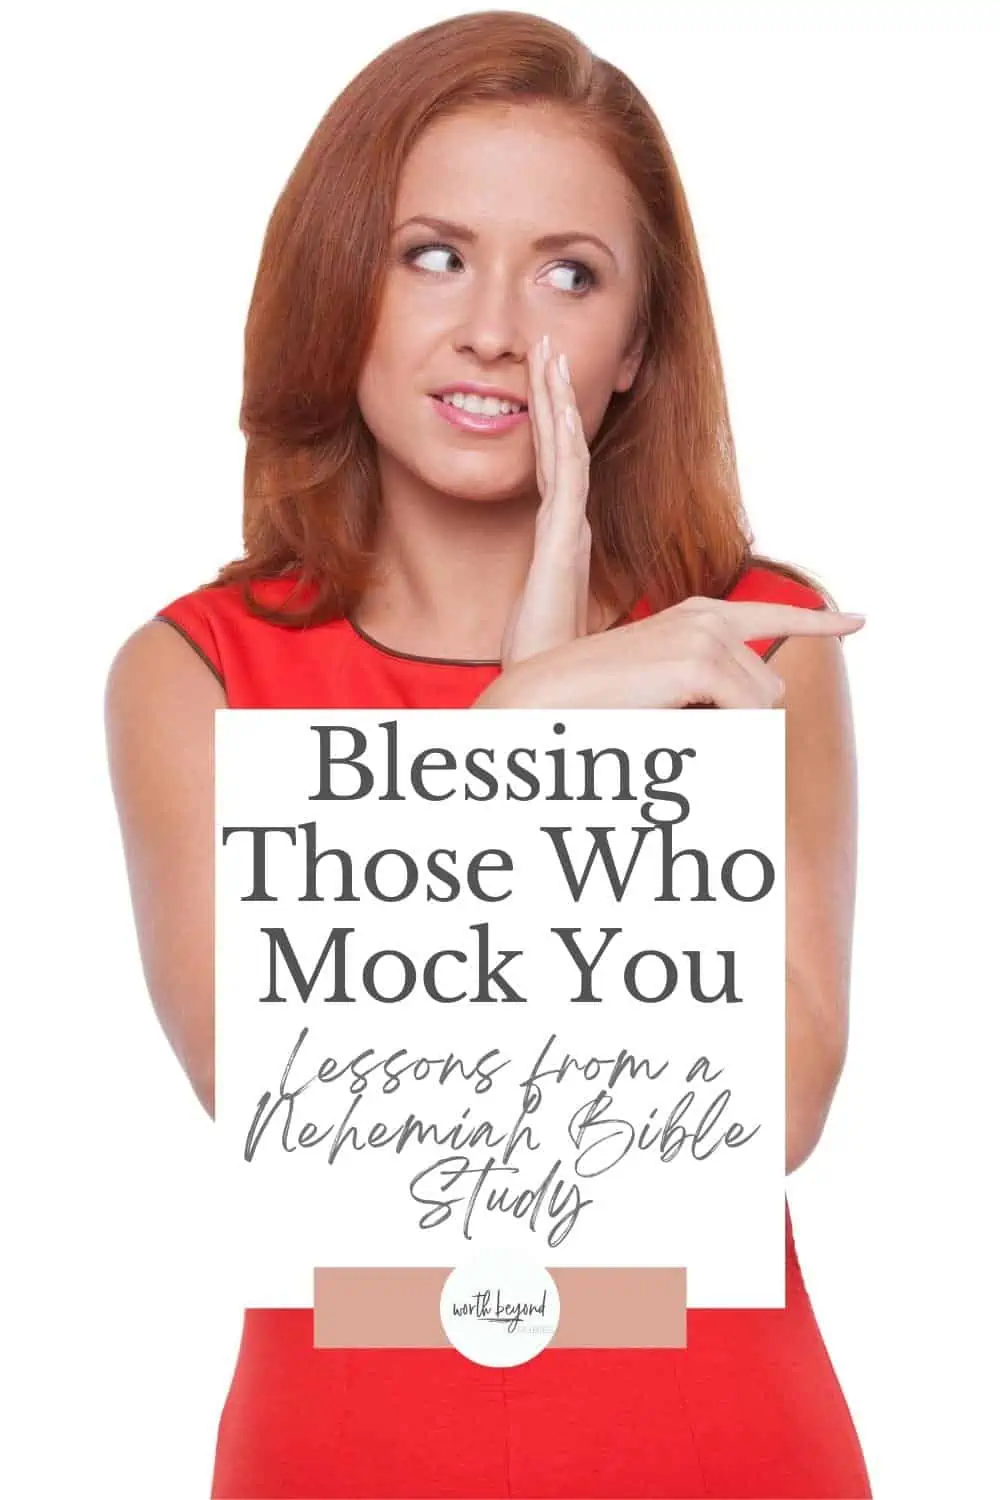 A red haired woman in a red dress with her hand up to her mouth with one hand and pointing with the other like she is gossiping and the Worth Beyond Rubies logo at the bottom of the image and a text overlay that says Blessing Those Who Mock You - Lessons From a Nehemiah Bible Study